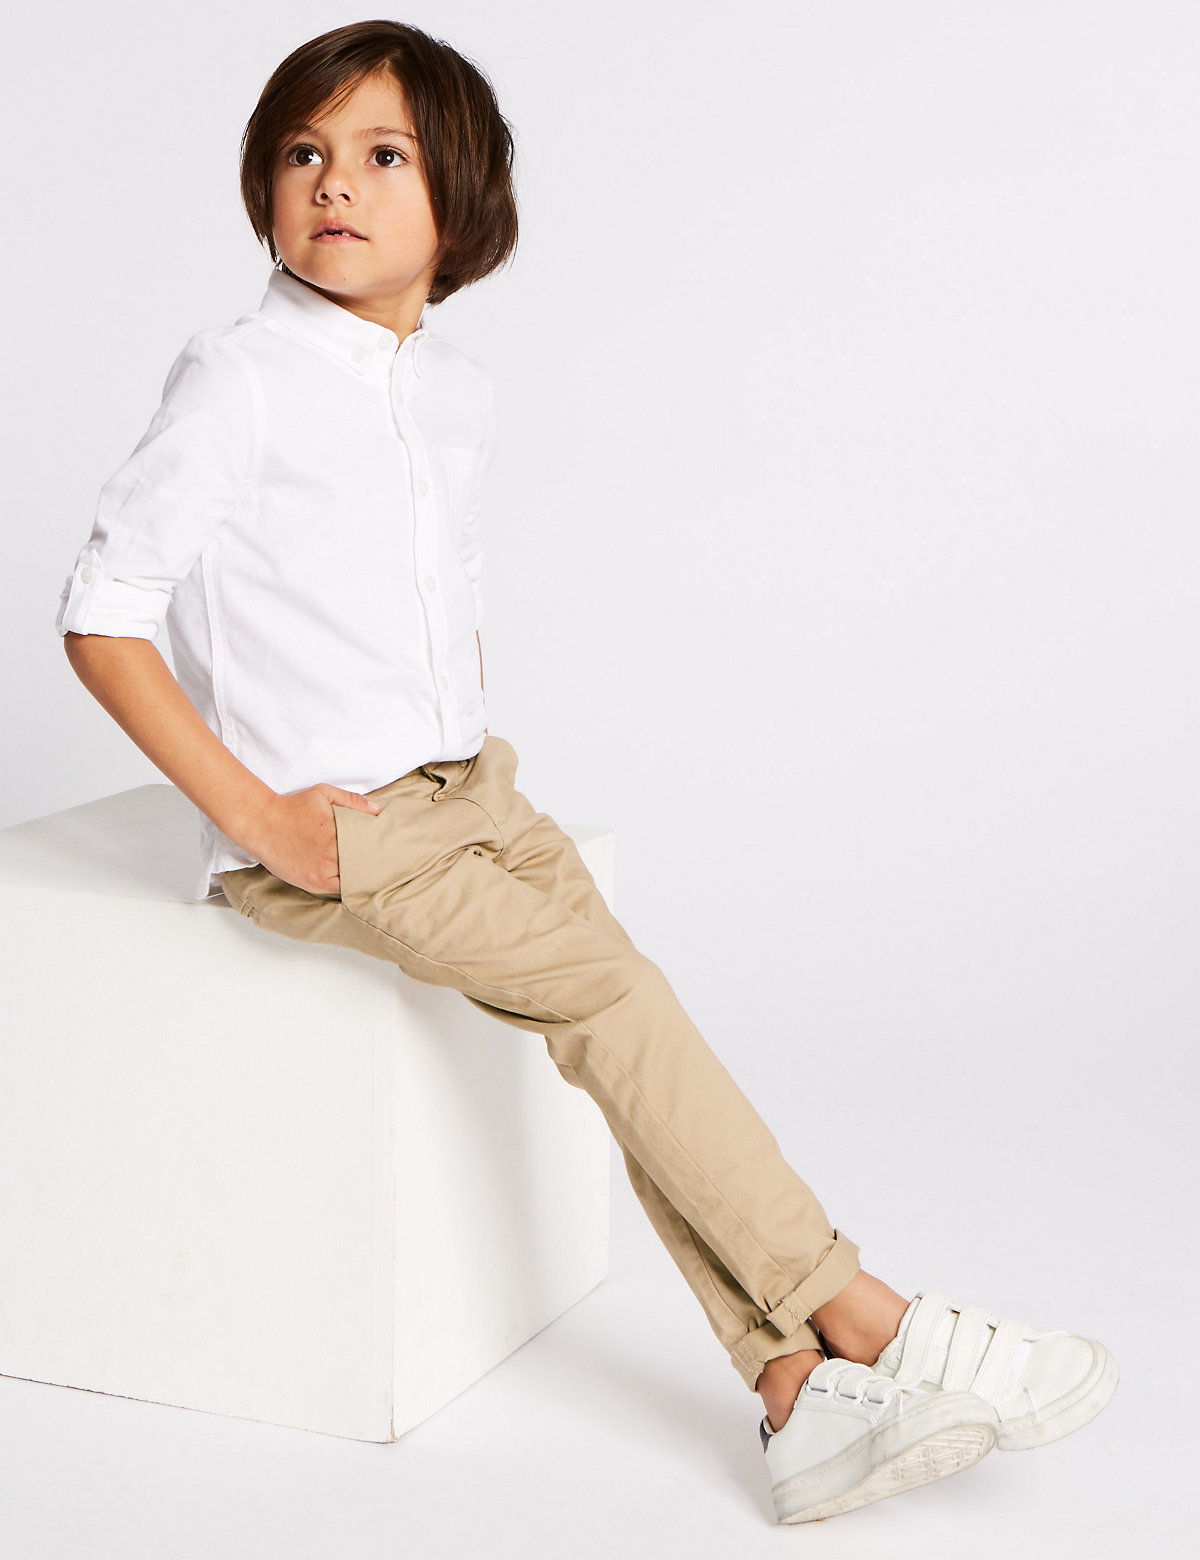 Cotton Chinos with Stretch (3 Mths - 7 Yrs)